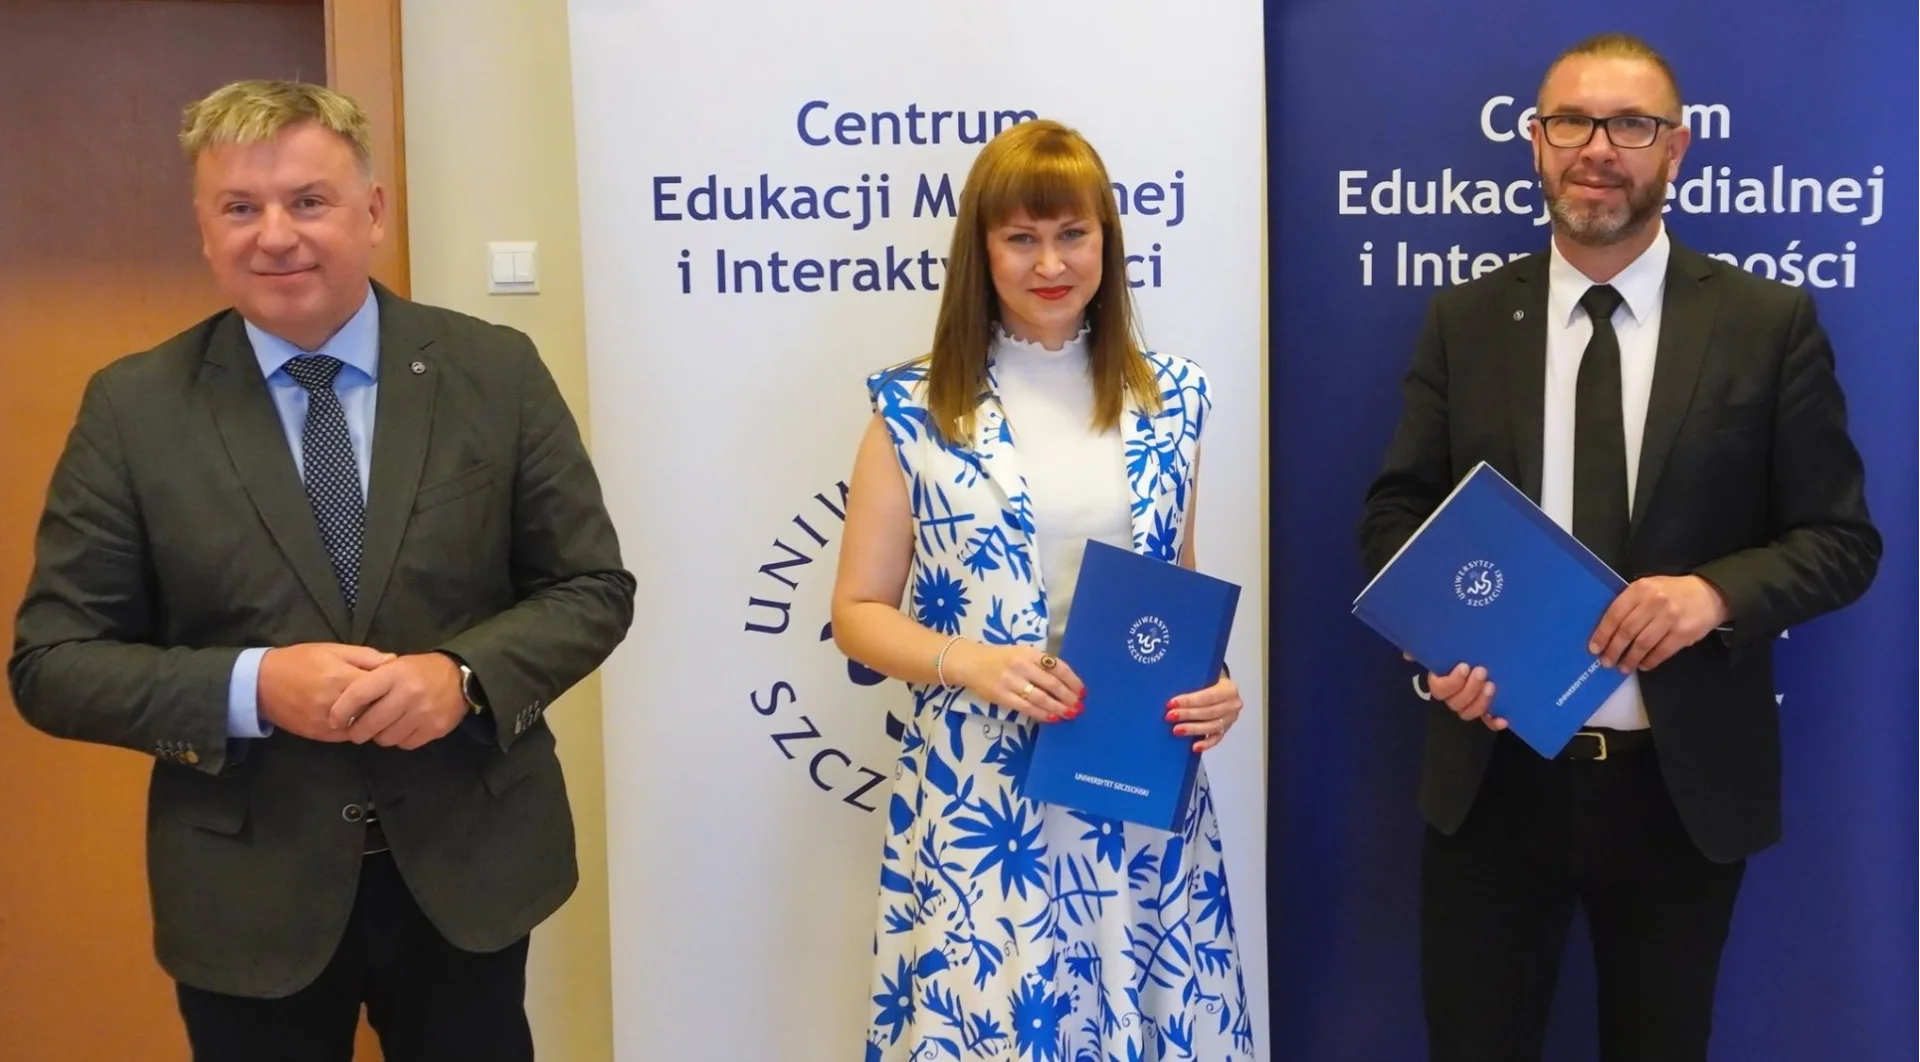 Members of the Council of the Center for Media Education and Interactivity of the University of Szczecin have been  appointed.